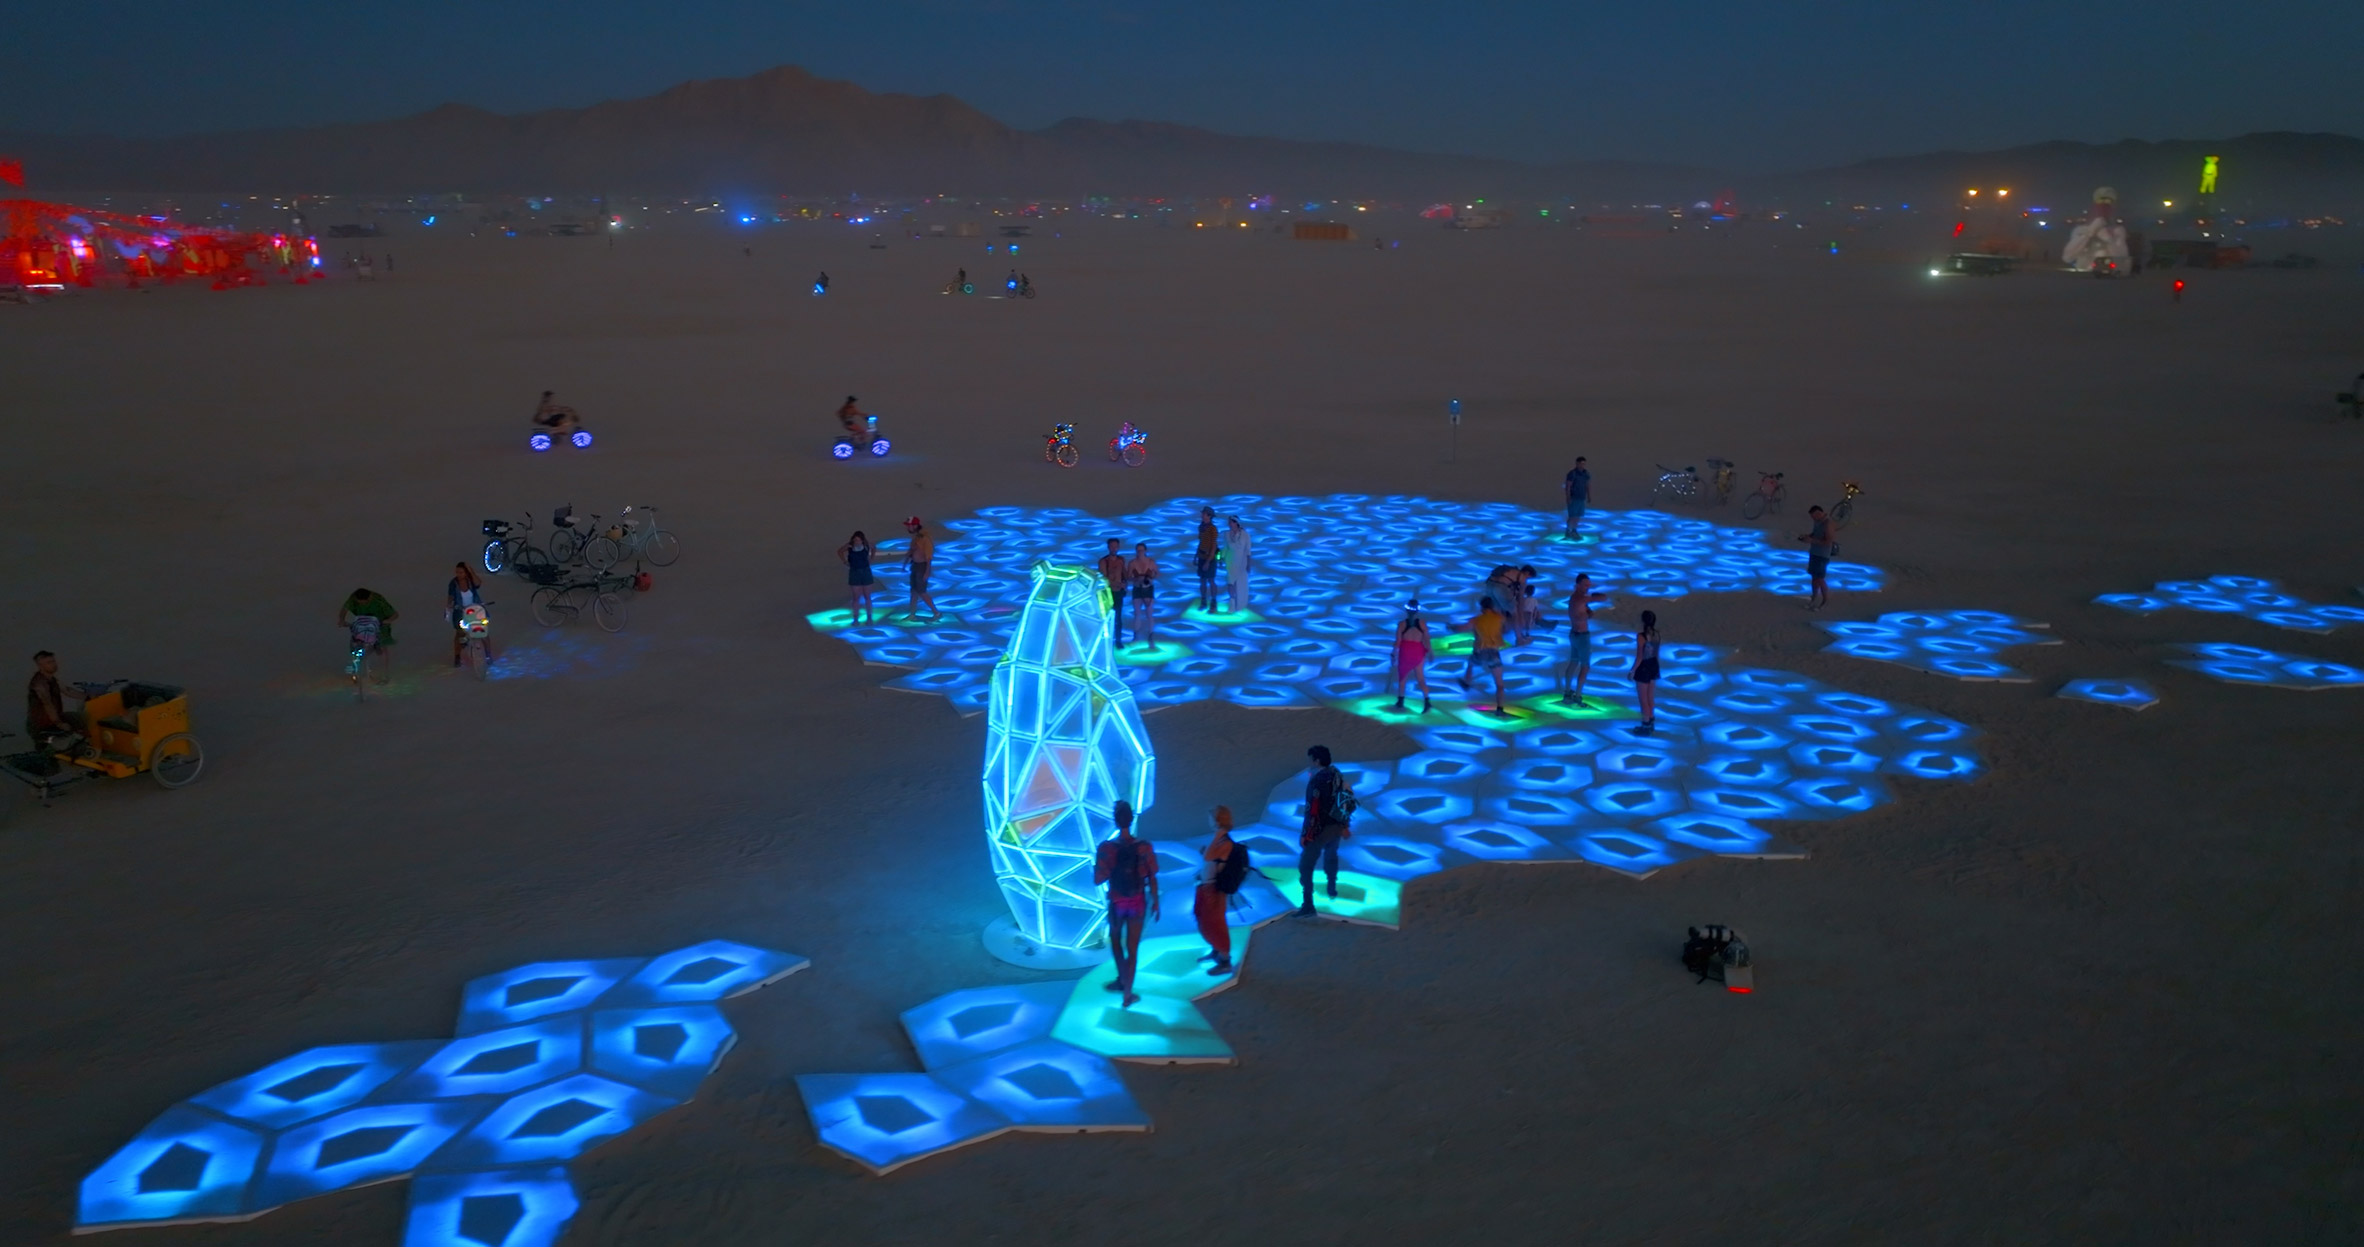 Jenny Lewin recycled plastic sculpture burning man